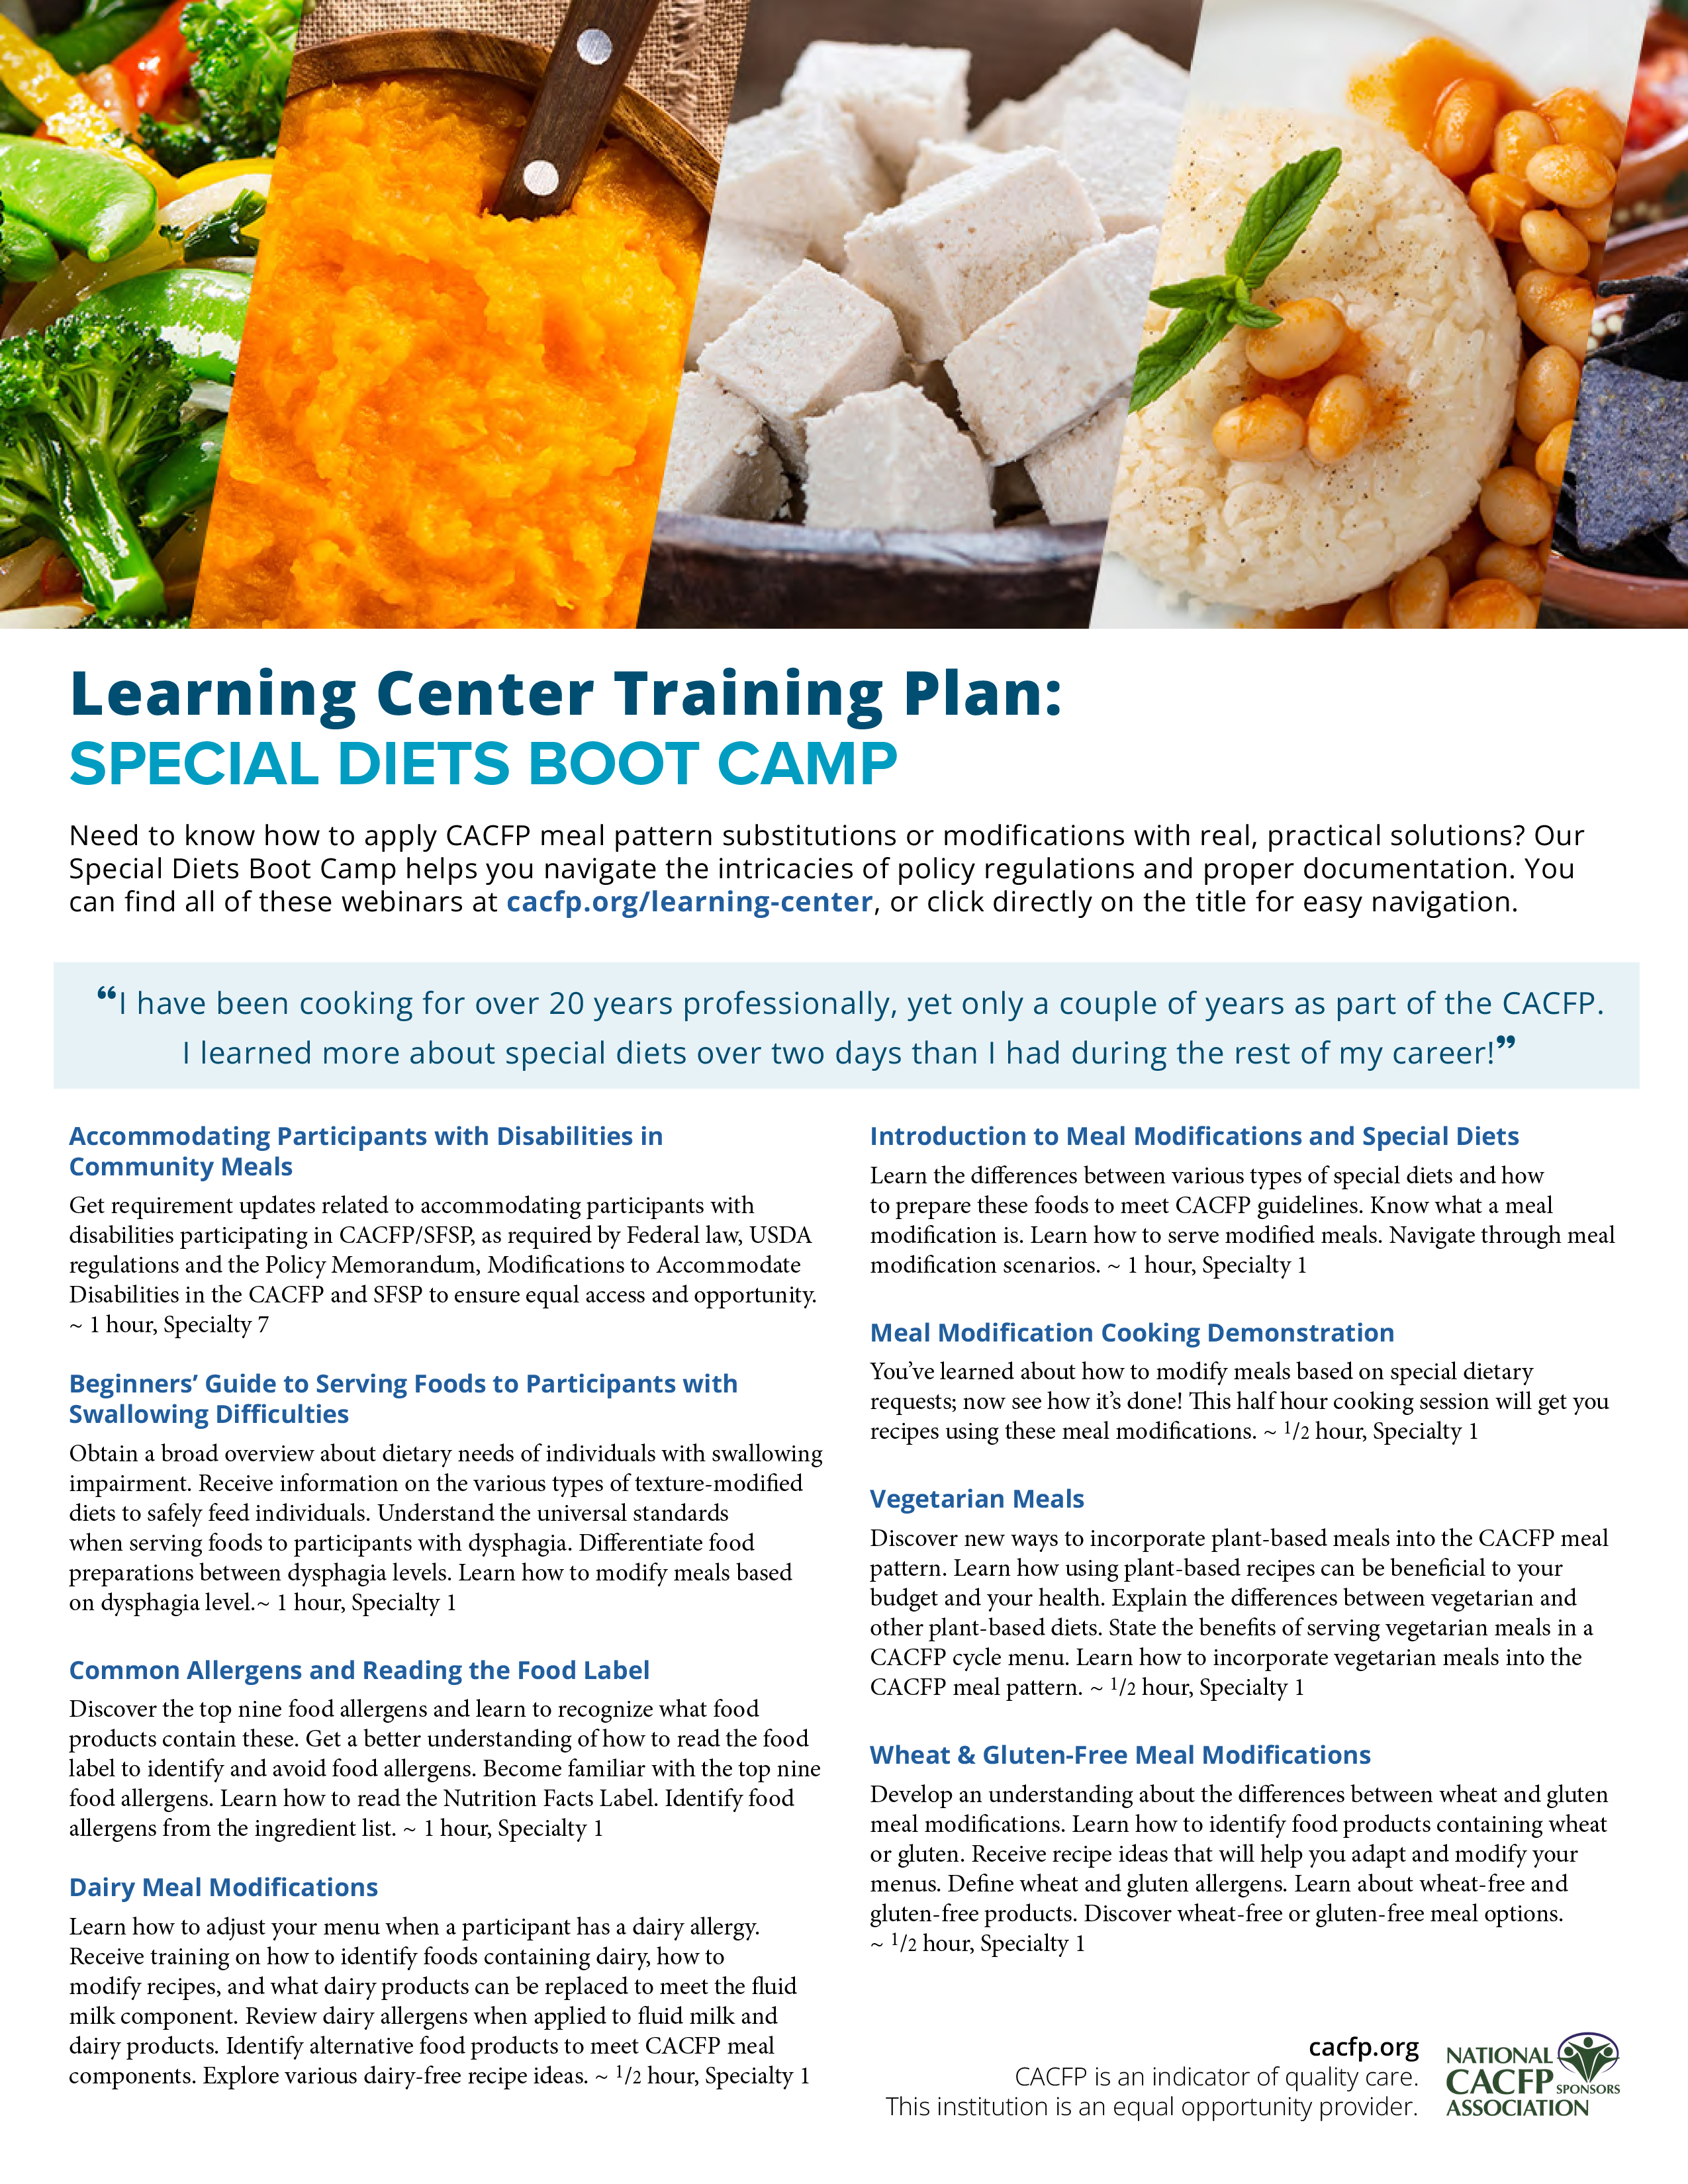 Special Diets Training Plan